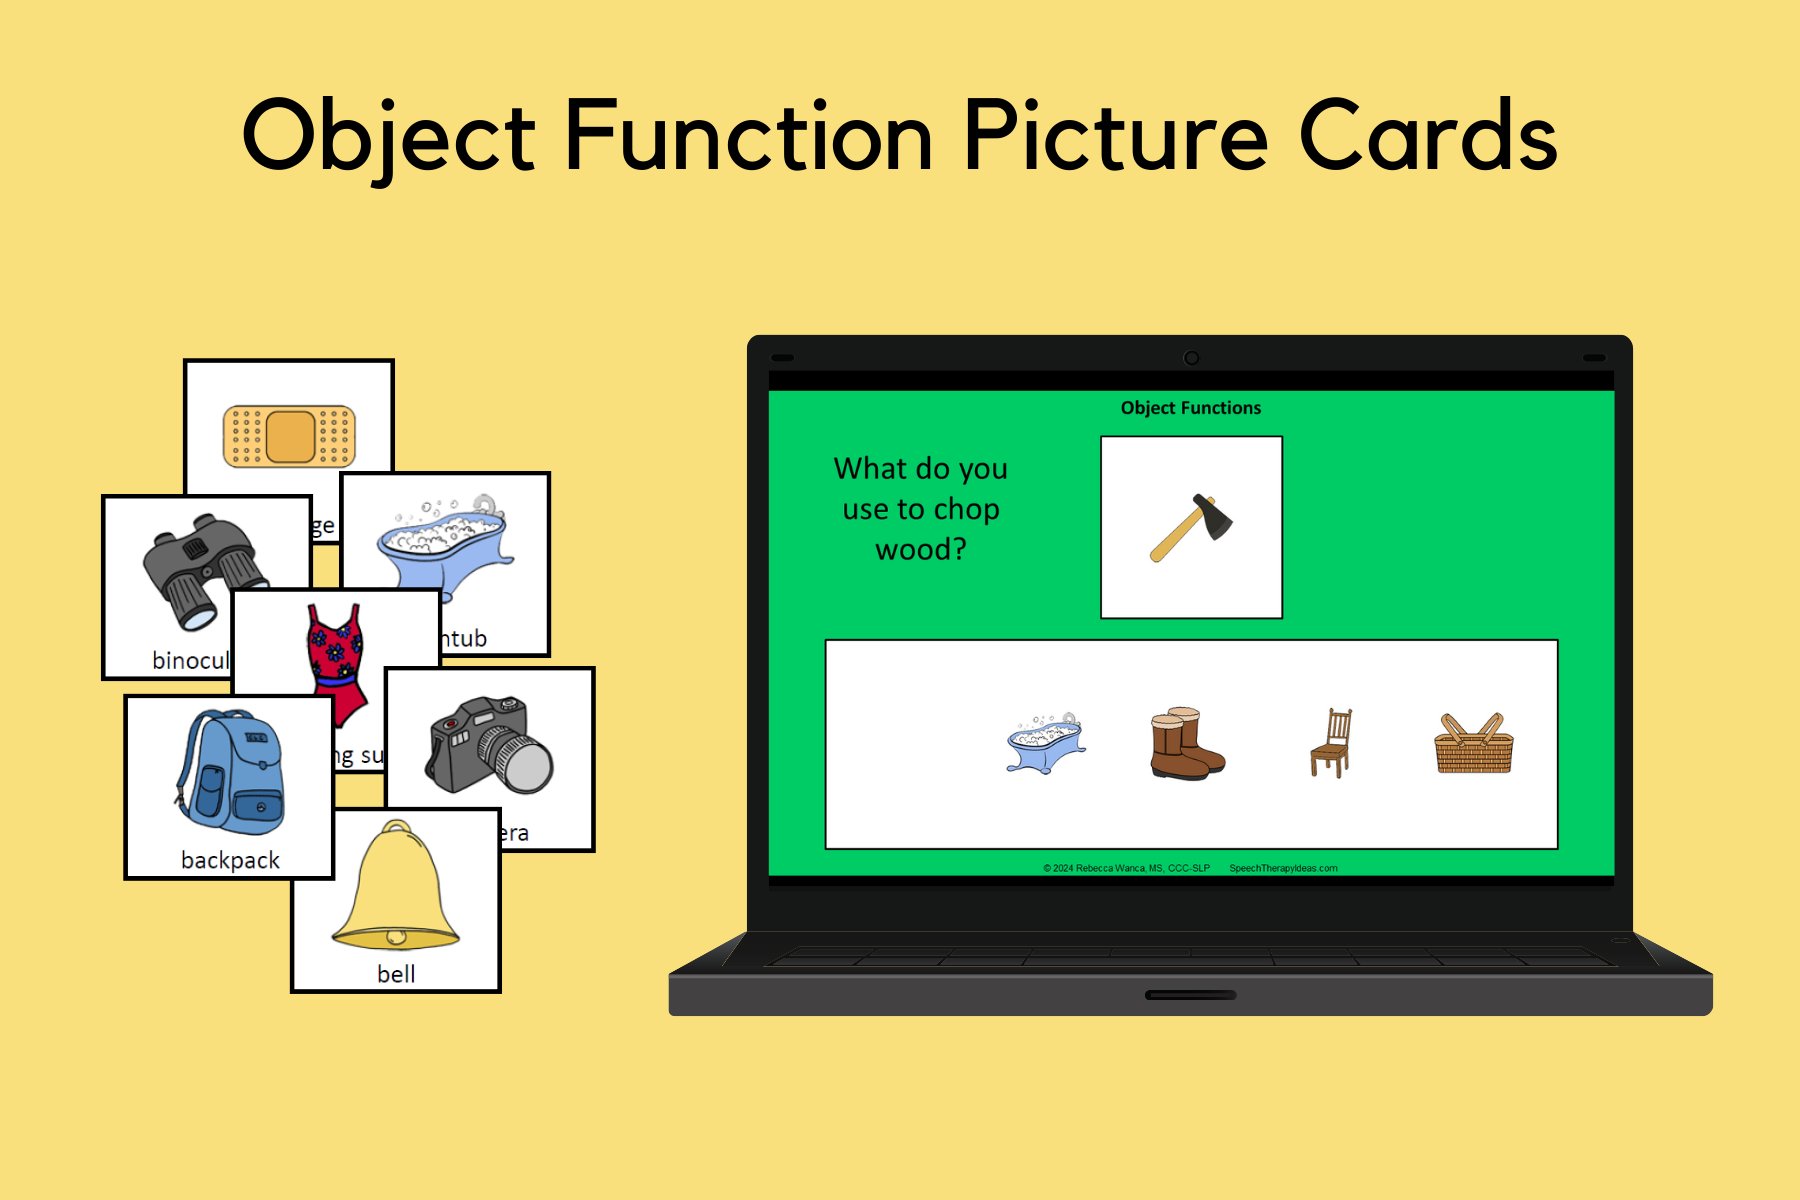 Object Function Picture Cards